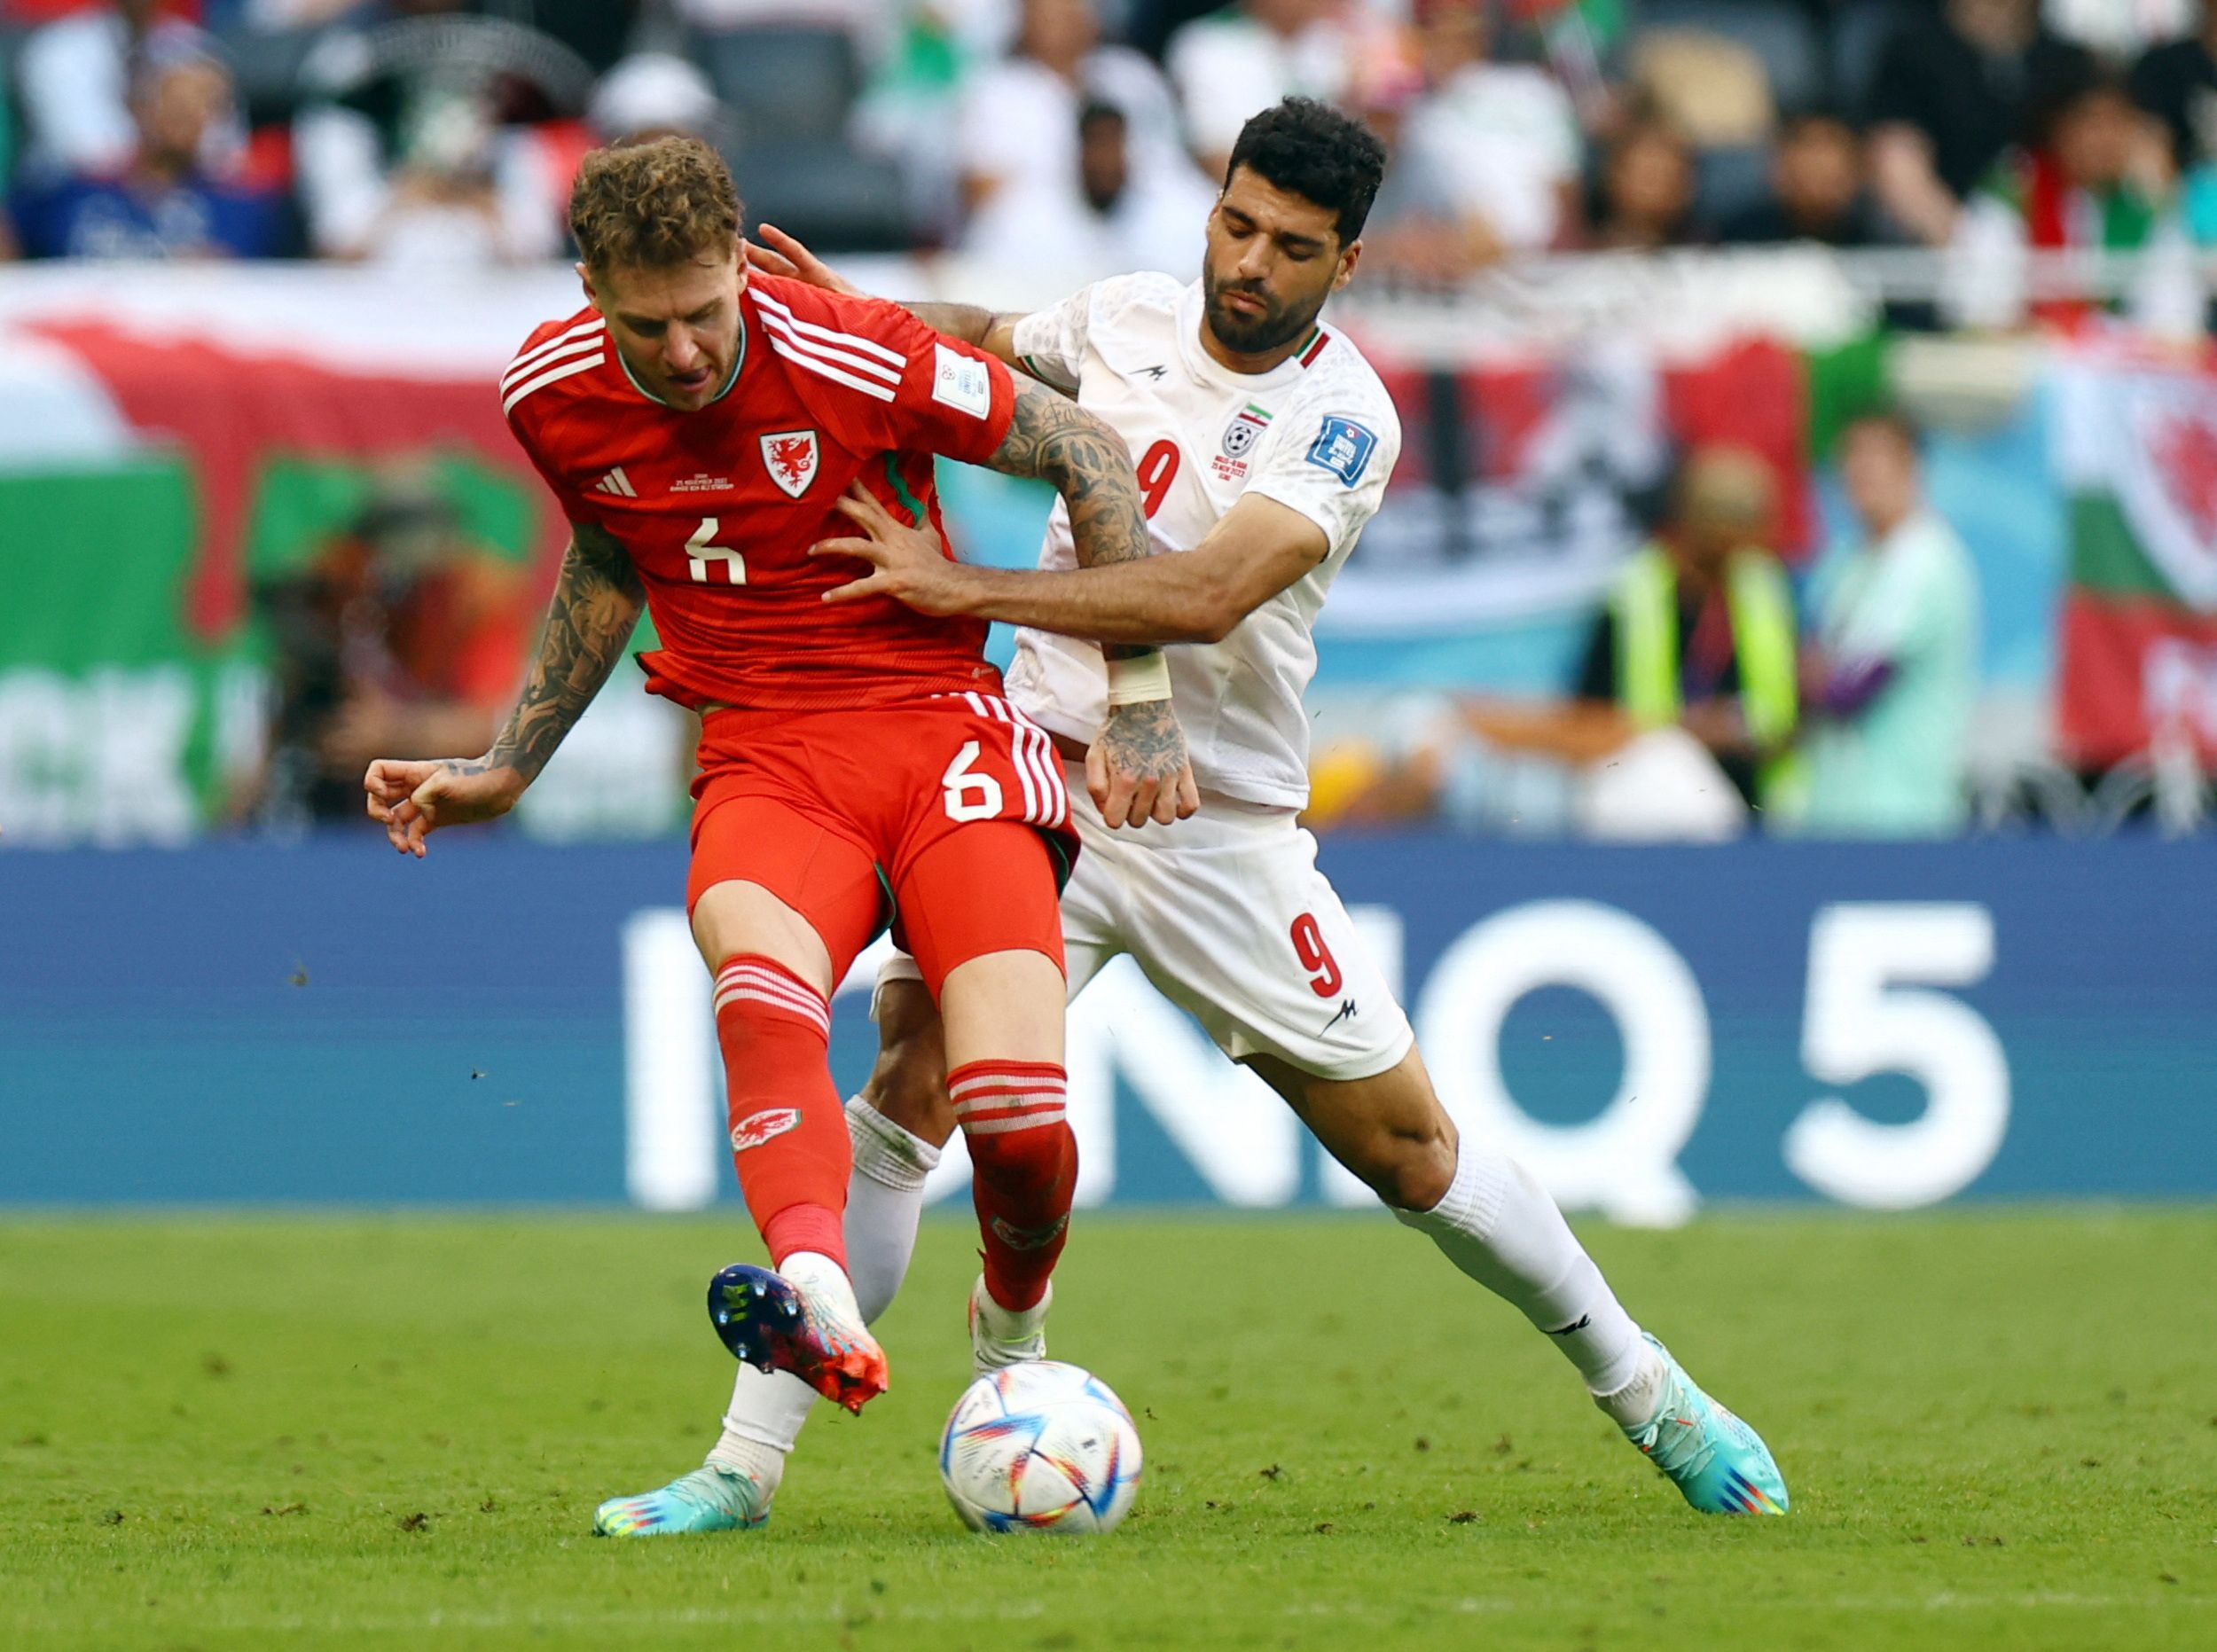 Premier League, Nottingham Forest, Nottingham Forest news, Nottingham Forest update, Nottingham Forest transfers, NFFC opinion, NFFC update, NFFC latest news, World Cup 2022, Joe Rodon